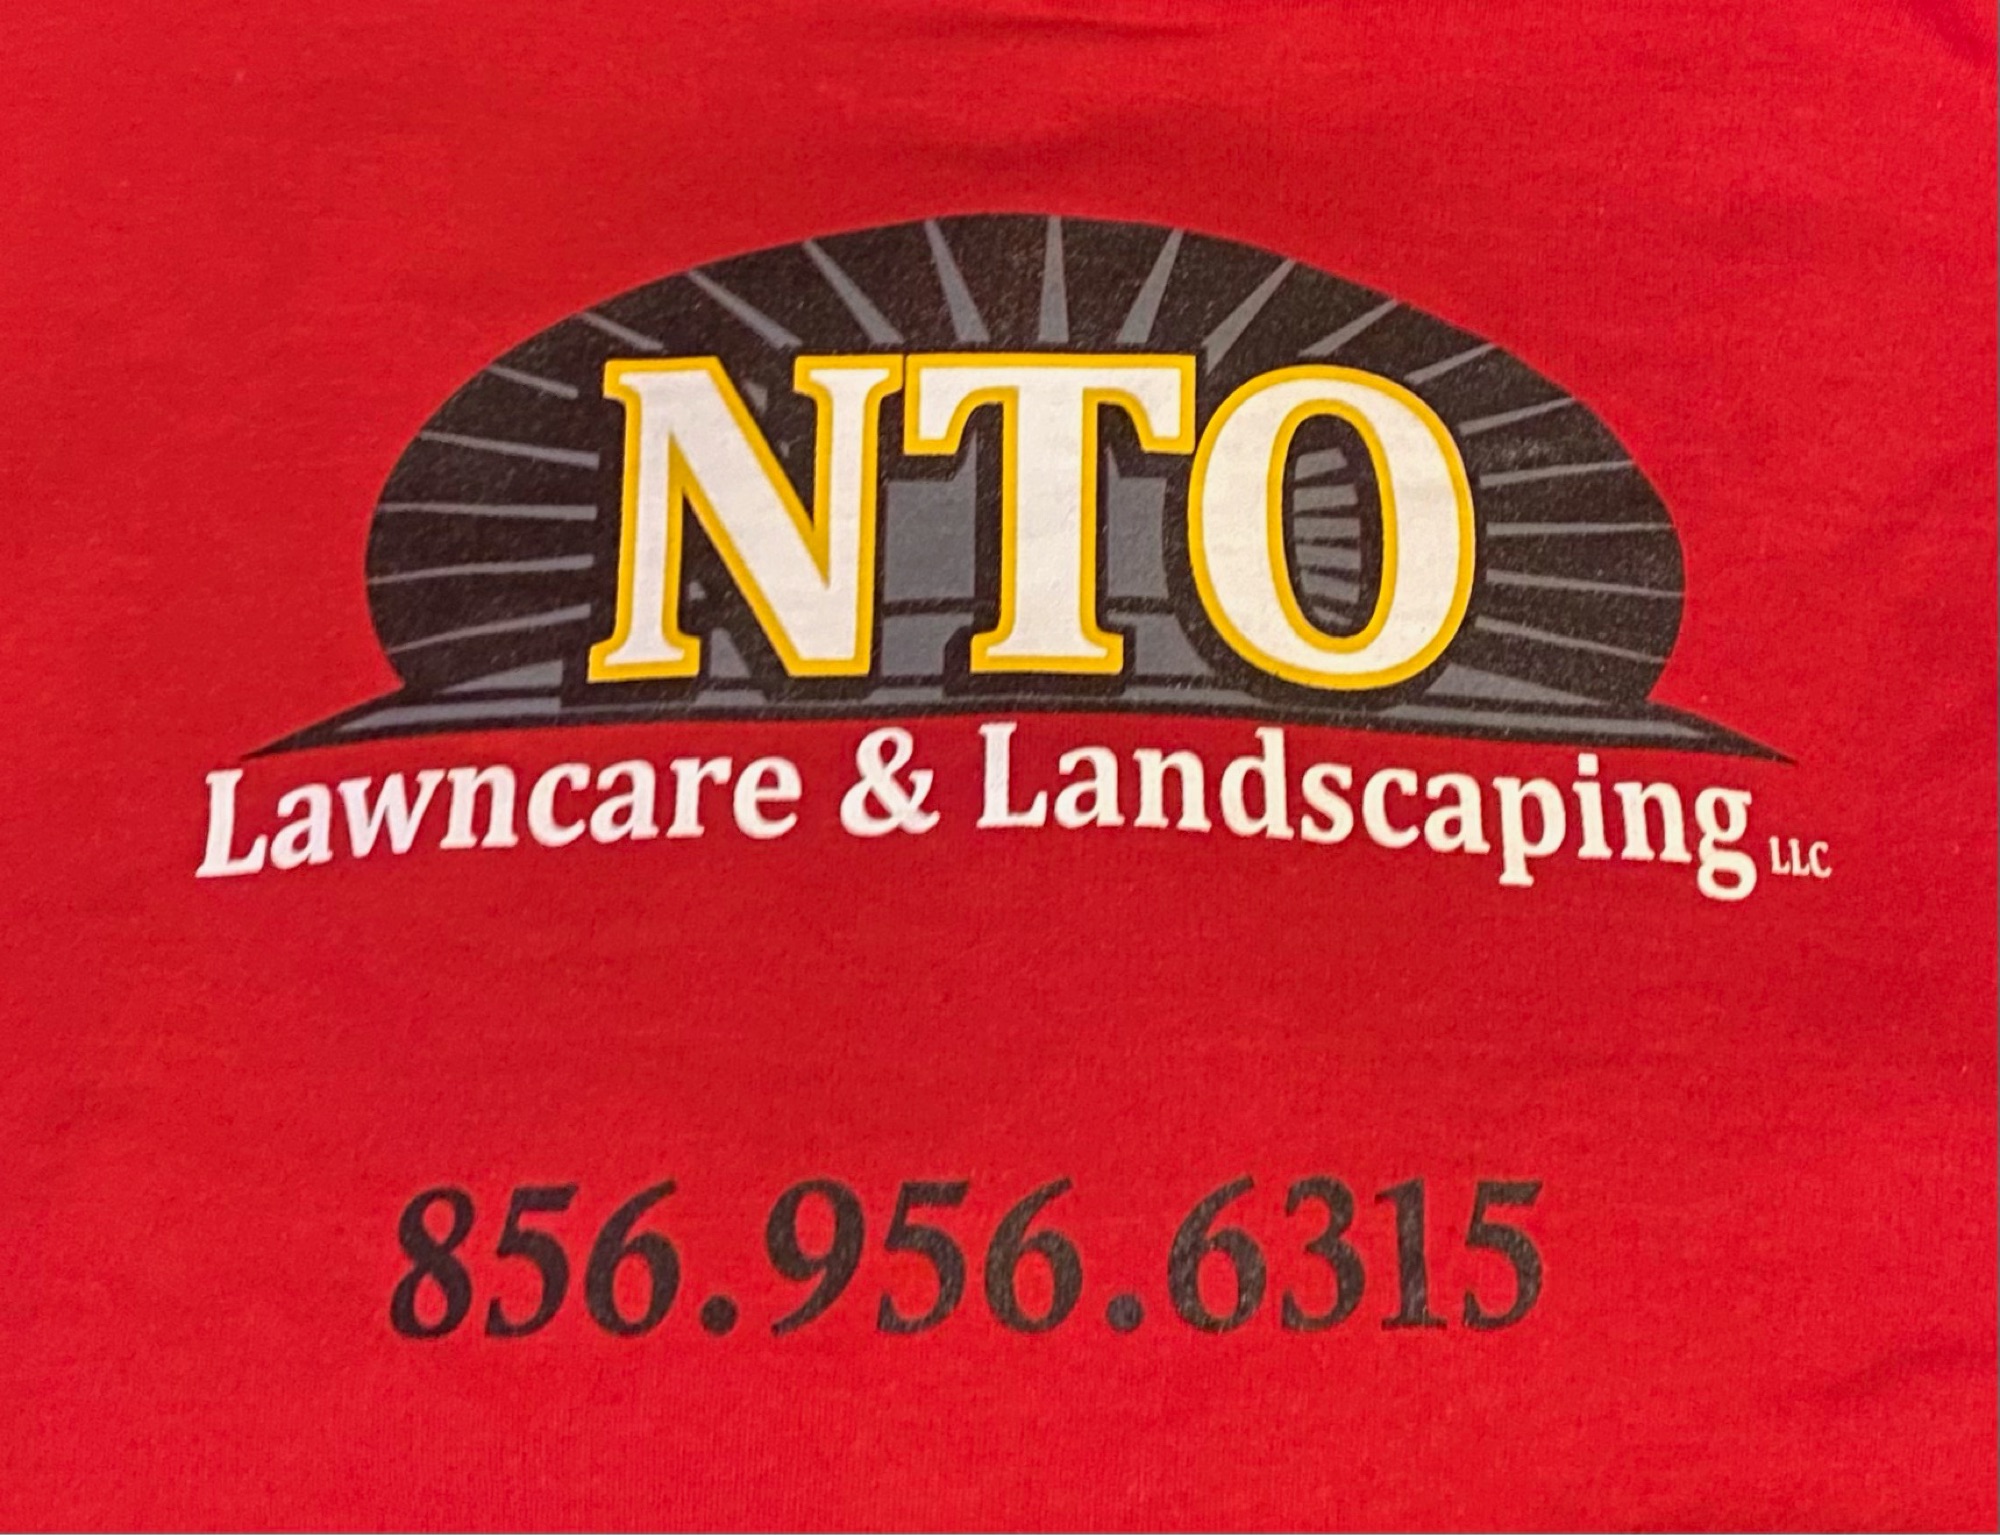 NTO Lawn Care & Landscaping Logo